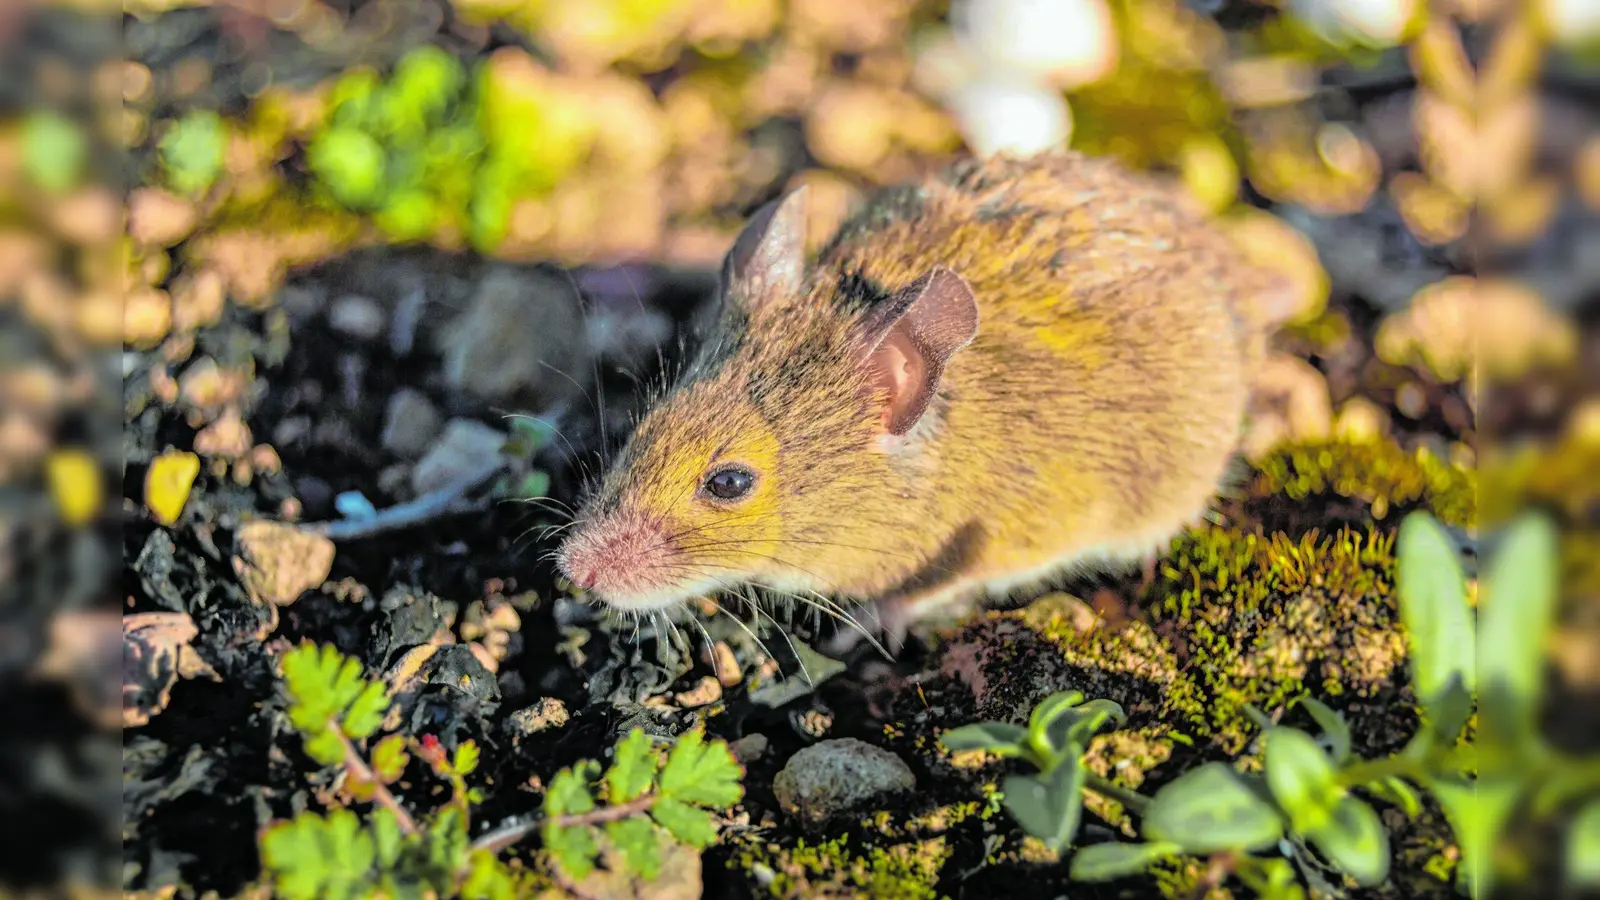 Cute and small field mouse (Apodemus sylvaticus) in the nature of the countryside. Wild brown wood mouse during a sunny day. (Foto: tr)